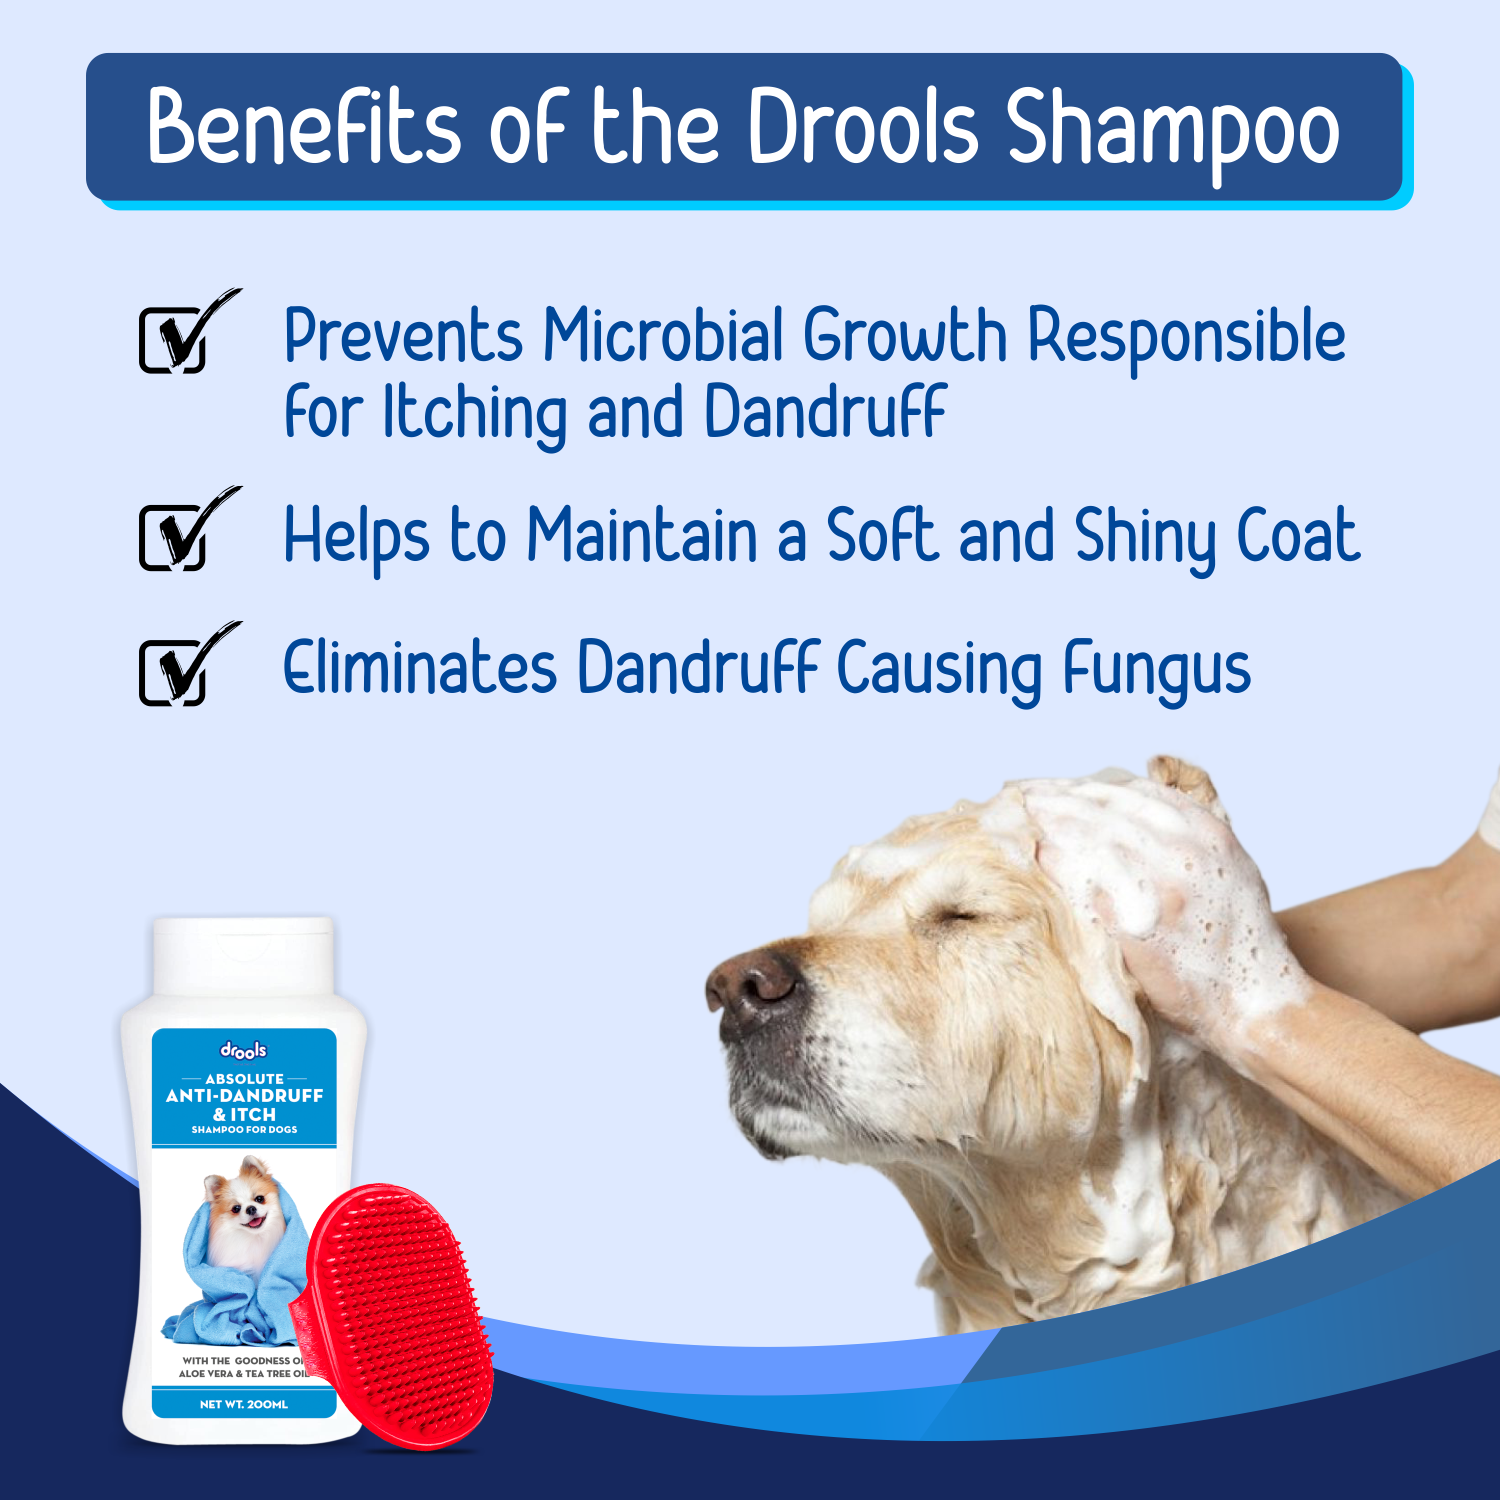 Drools Anti Dandruff and Itch Shampoo for Dogs (Free Hand Brush)